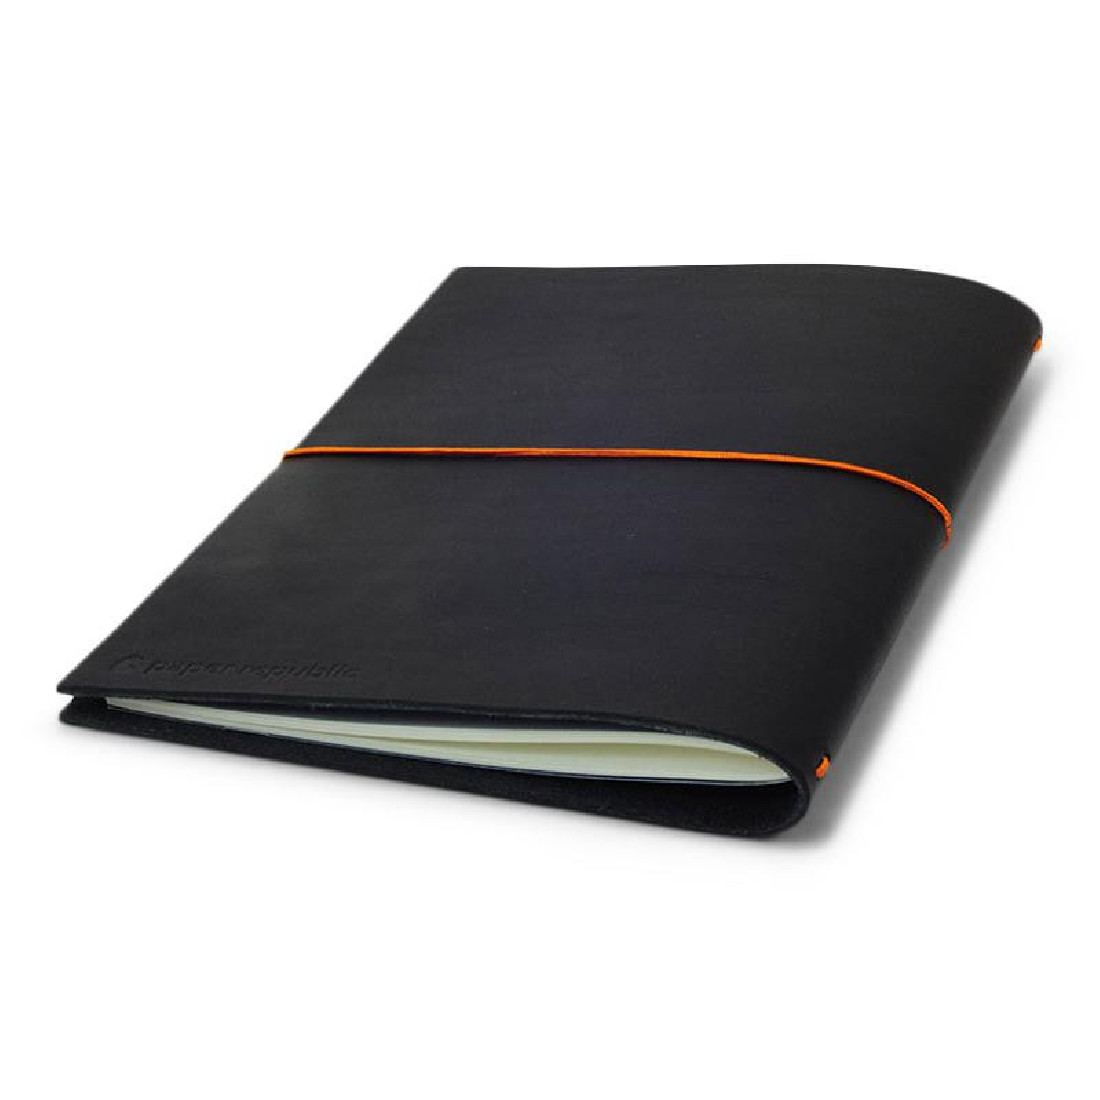 Paper Republic the writers essentials [xl] black leather journal kit